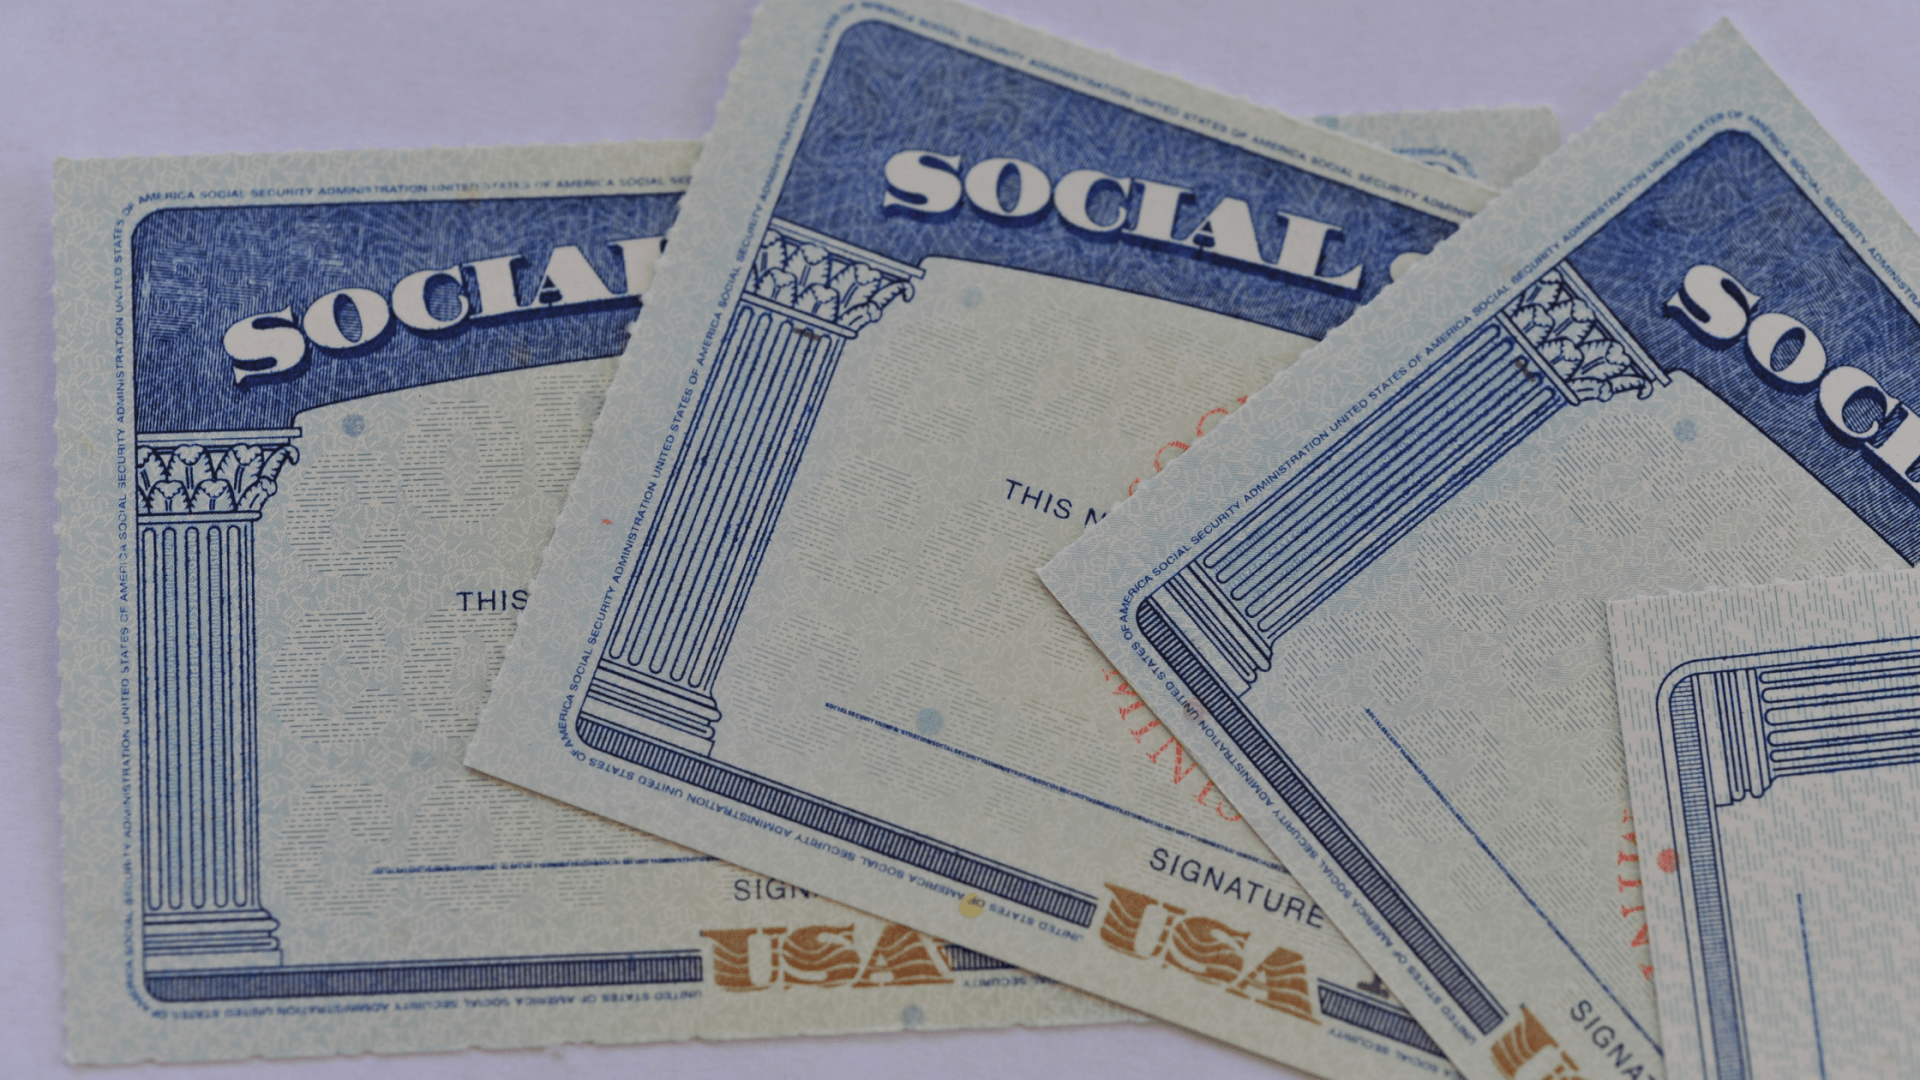 Can An Employer Require an Employee to Show Their Social Security Card?